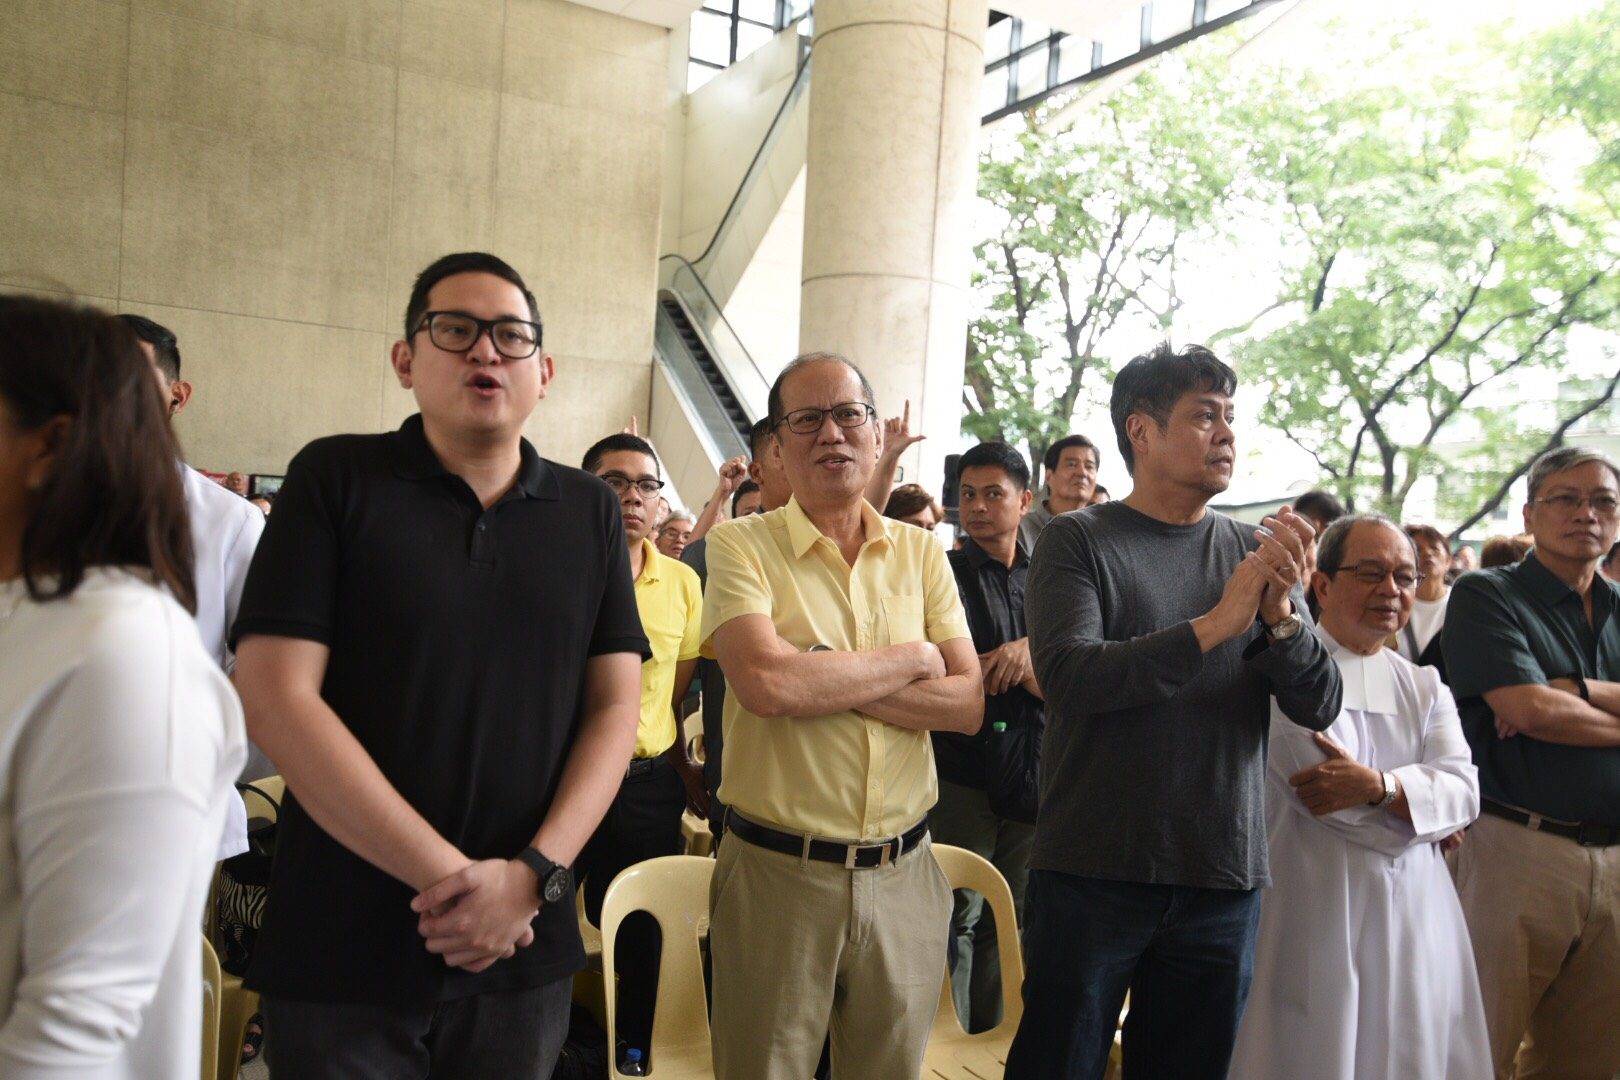 Aquino on Enrile: Old age not an excuse to bend truth about Martial Law